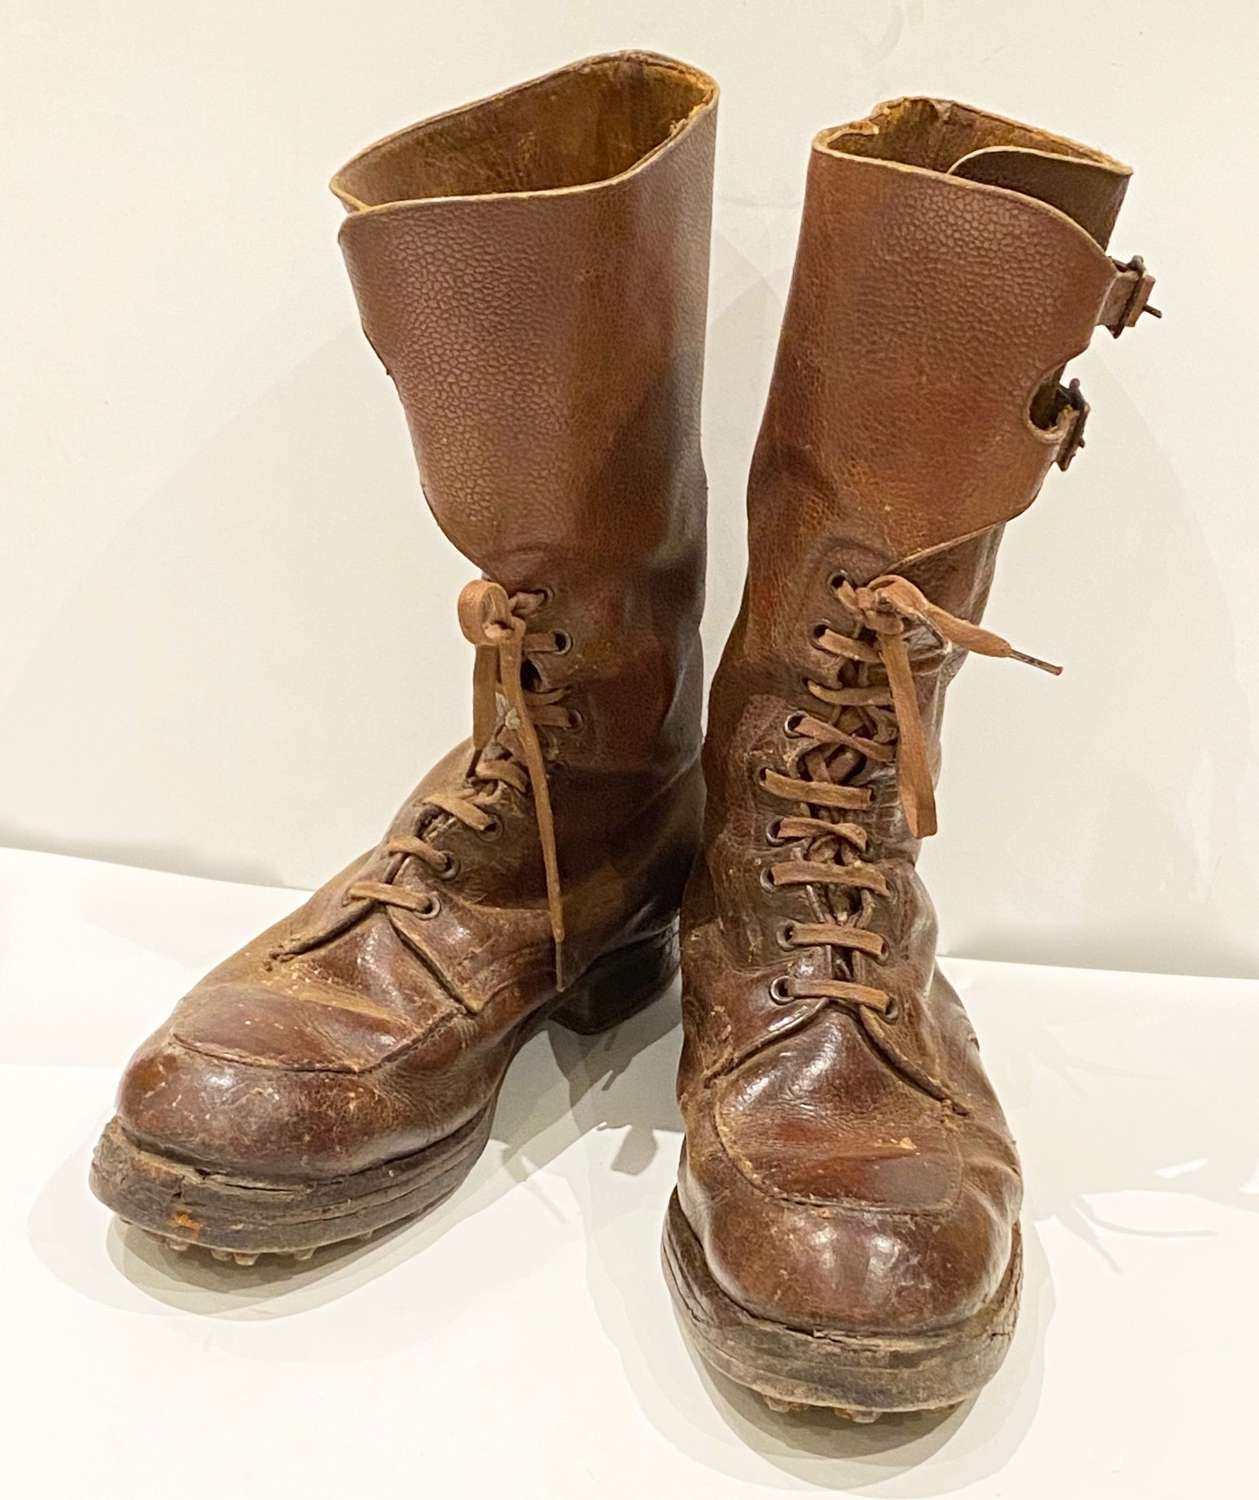 WW2 1944 British Army Officer’s High Leg Large Size Field Boots.